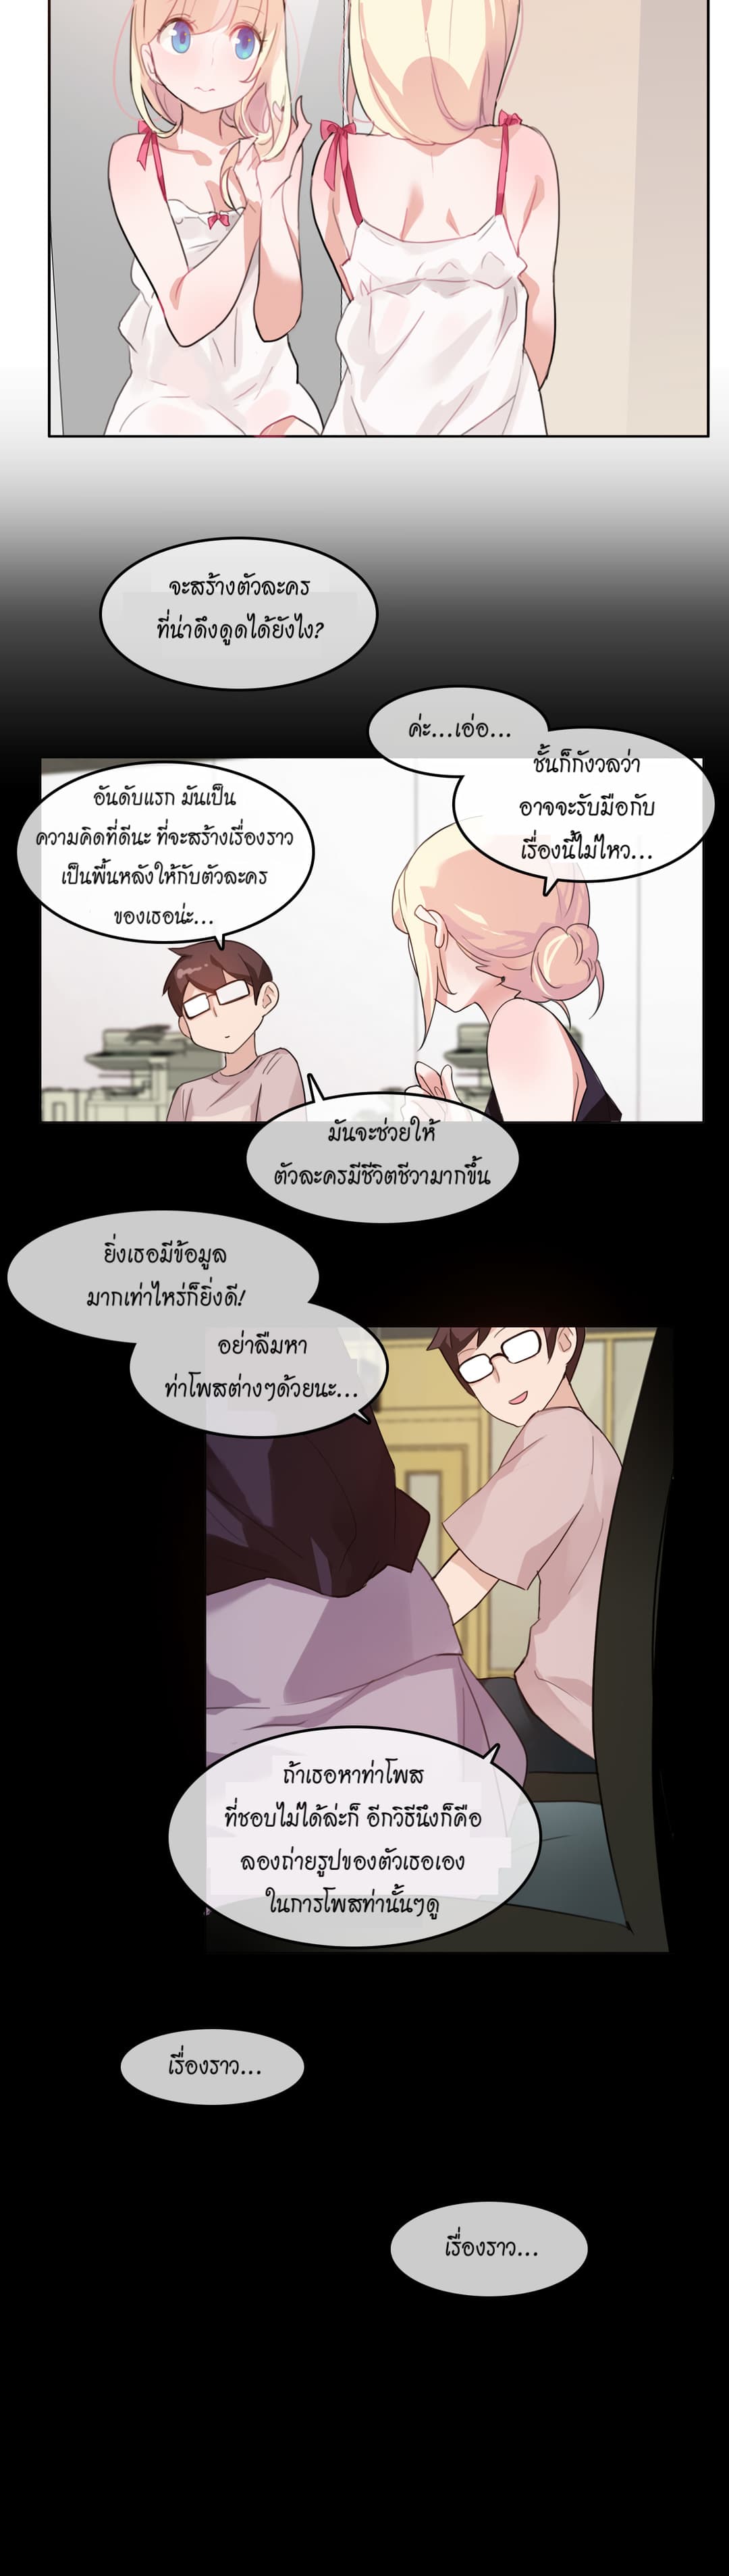 A Pervert’s Daily Life 6 (10)